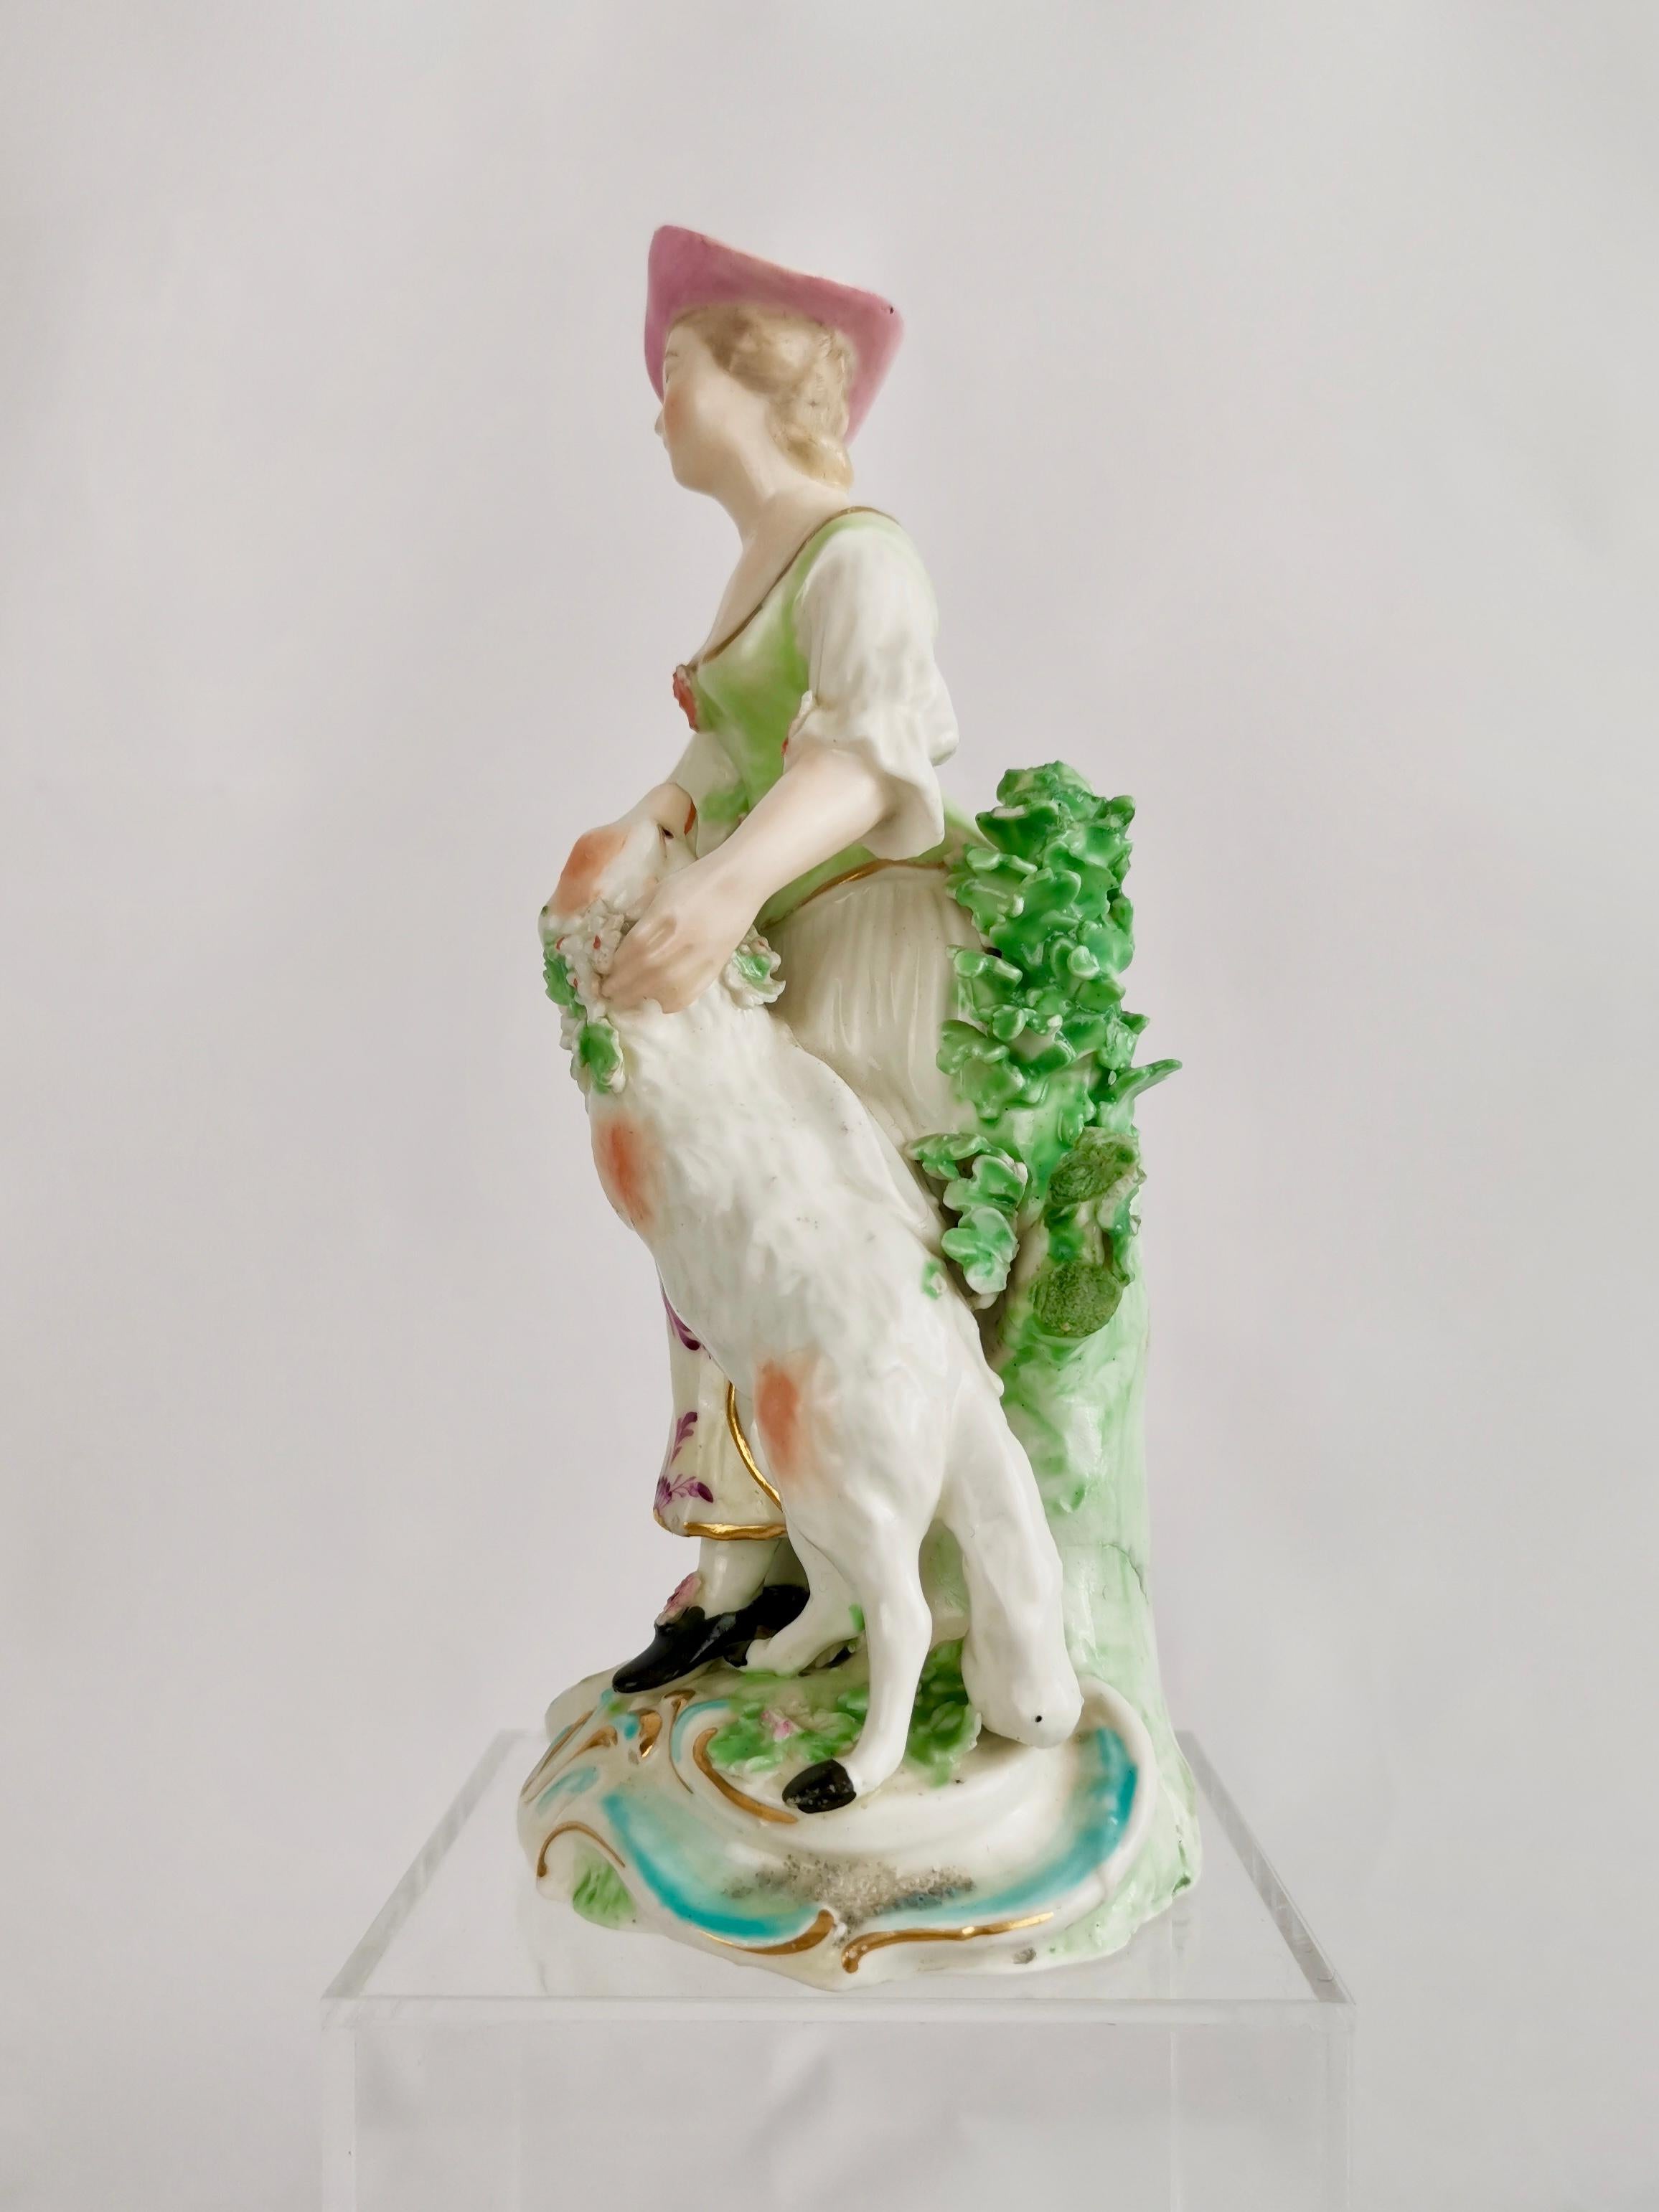 This is a charming Derby figure of a shepherdess with a garlanded lamb, made in or shortly after 1760. The figure is one half of a set called the 